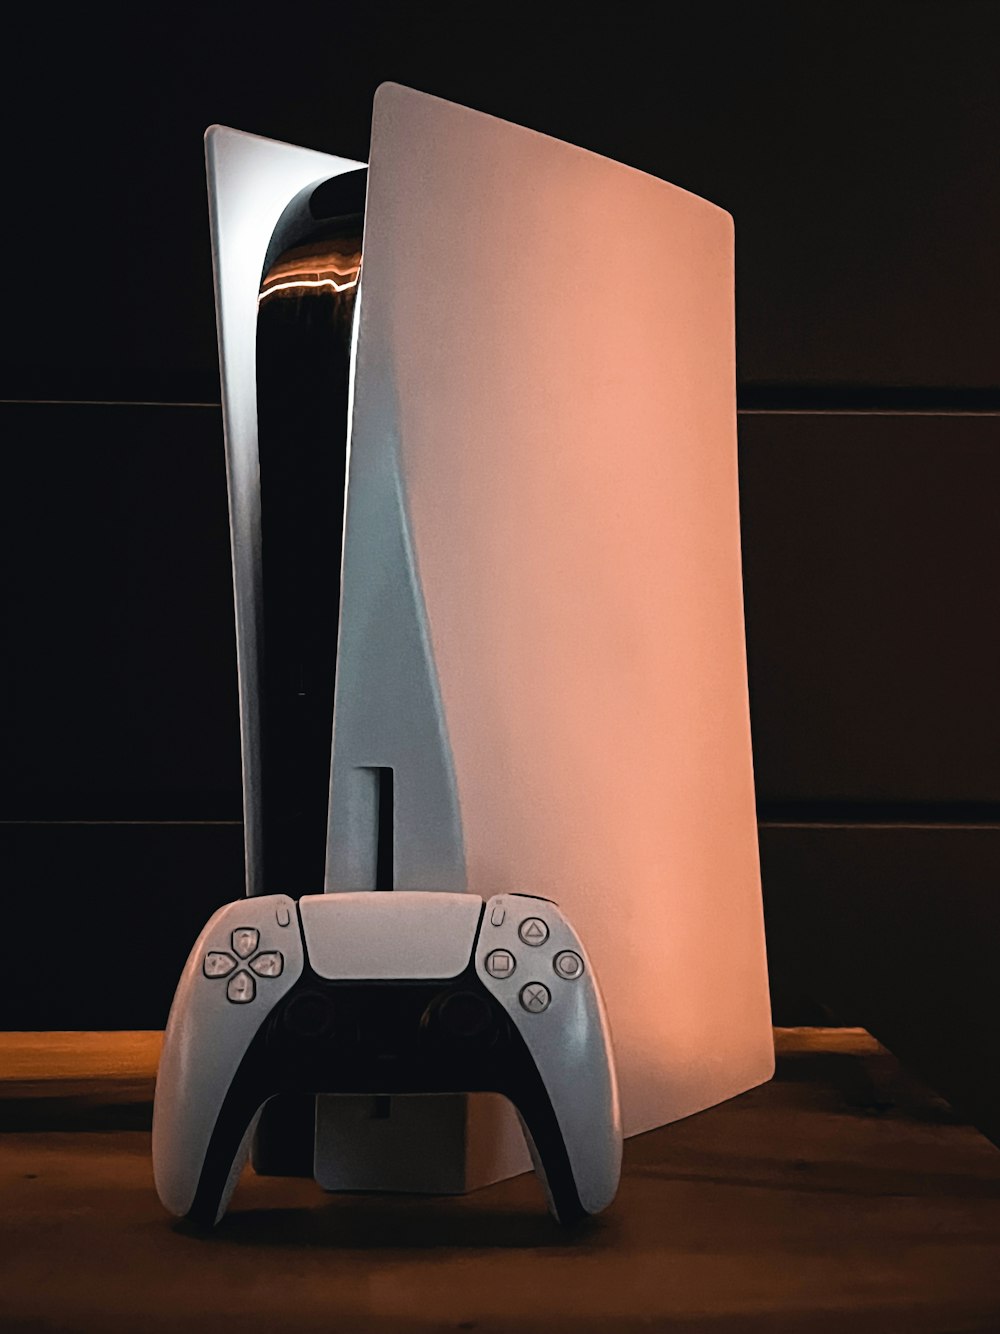 a nintendo wii game system sitting on top of a table